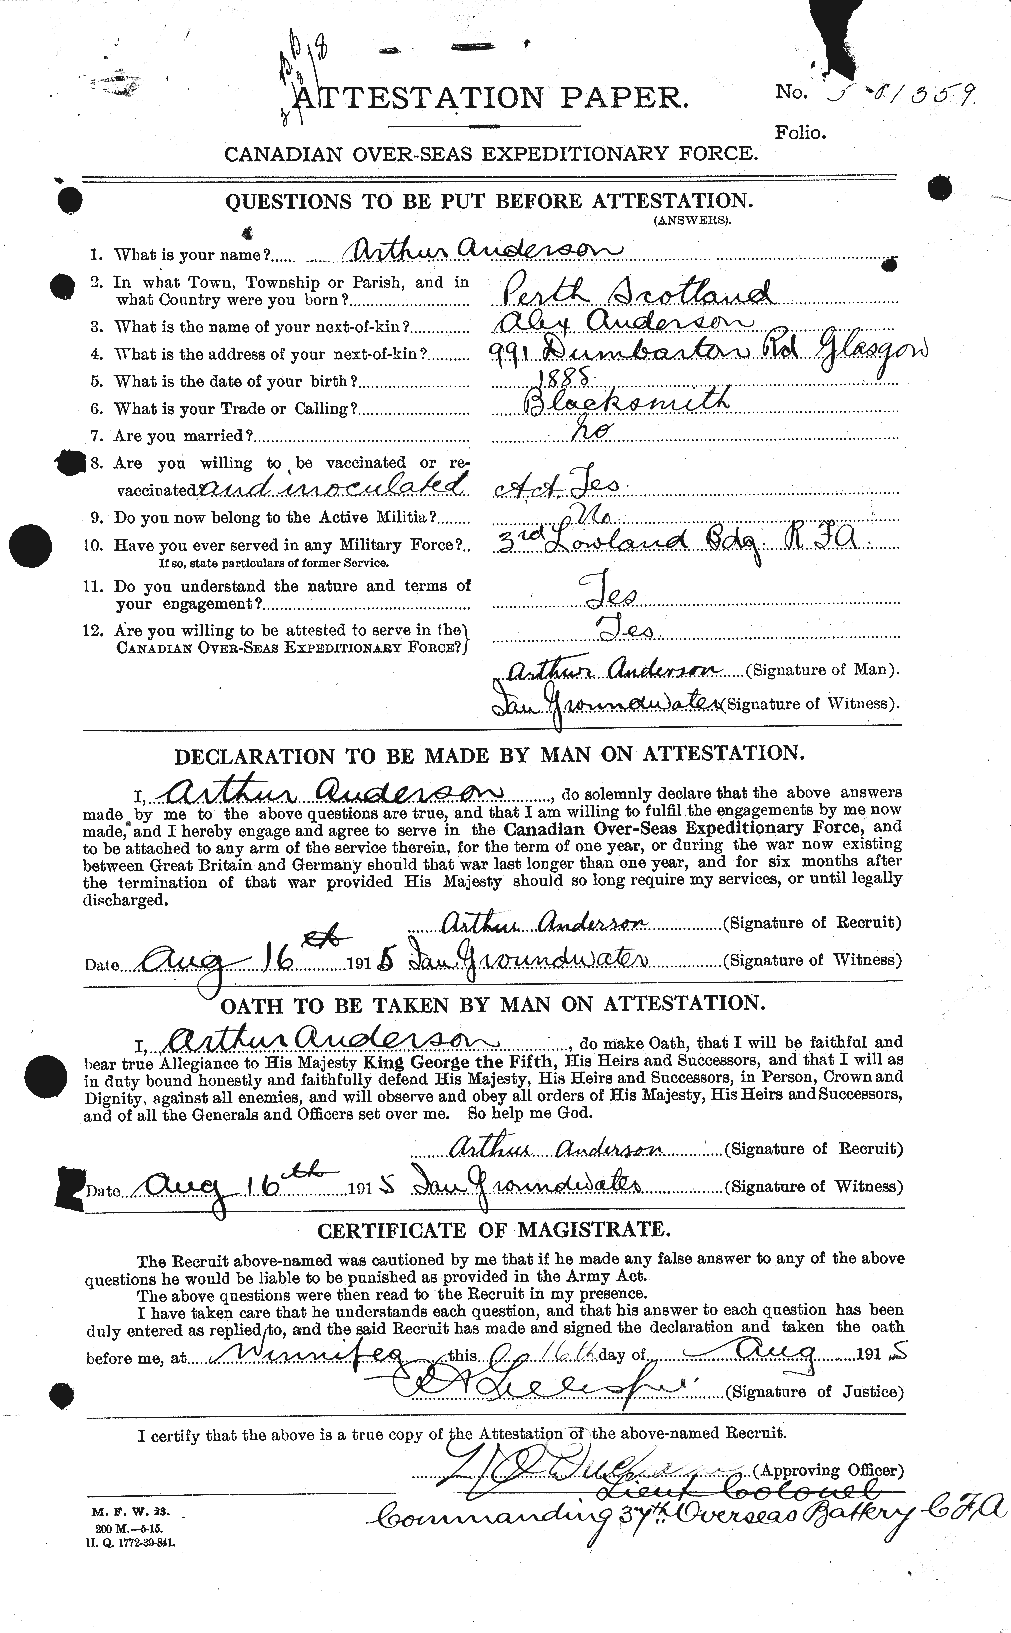 Personnel Records of the First World War - CEF 209370a